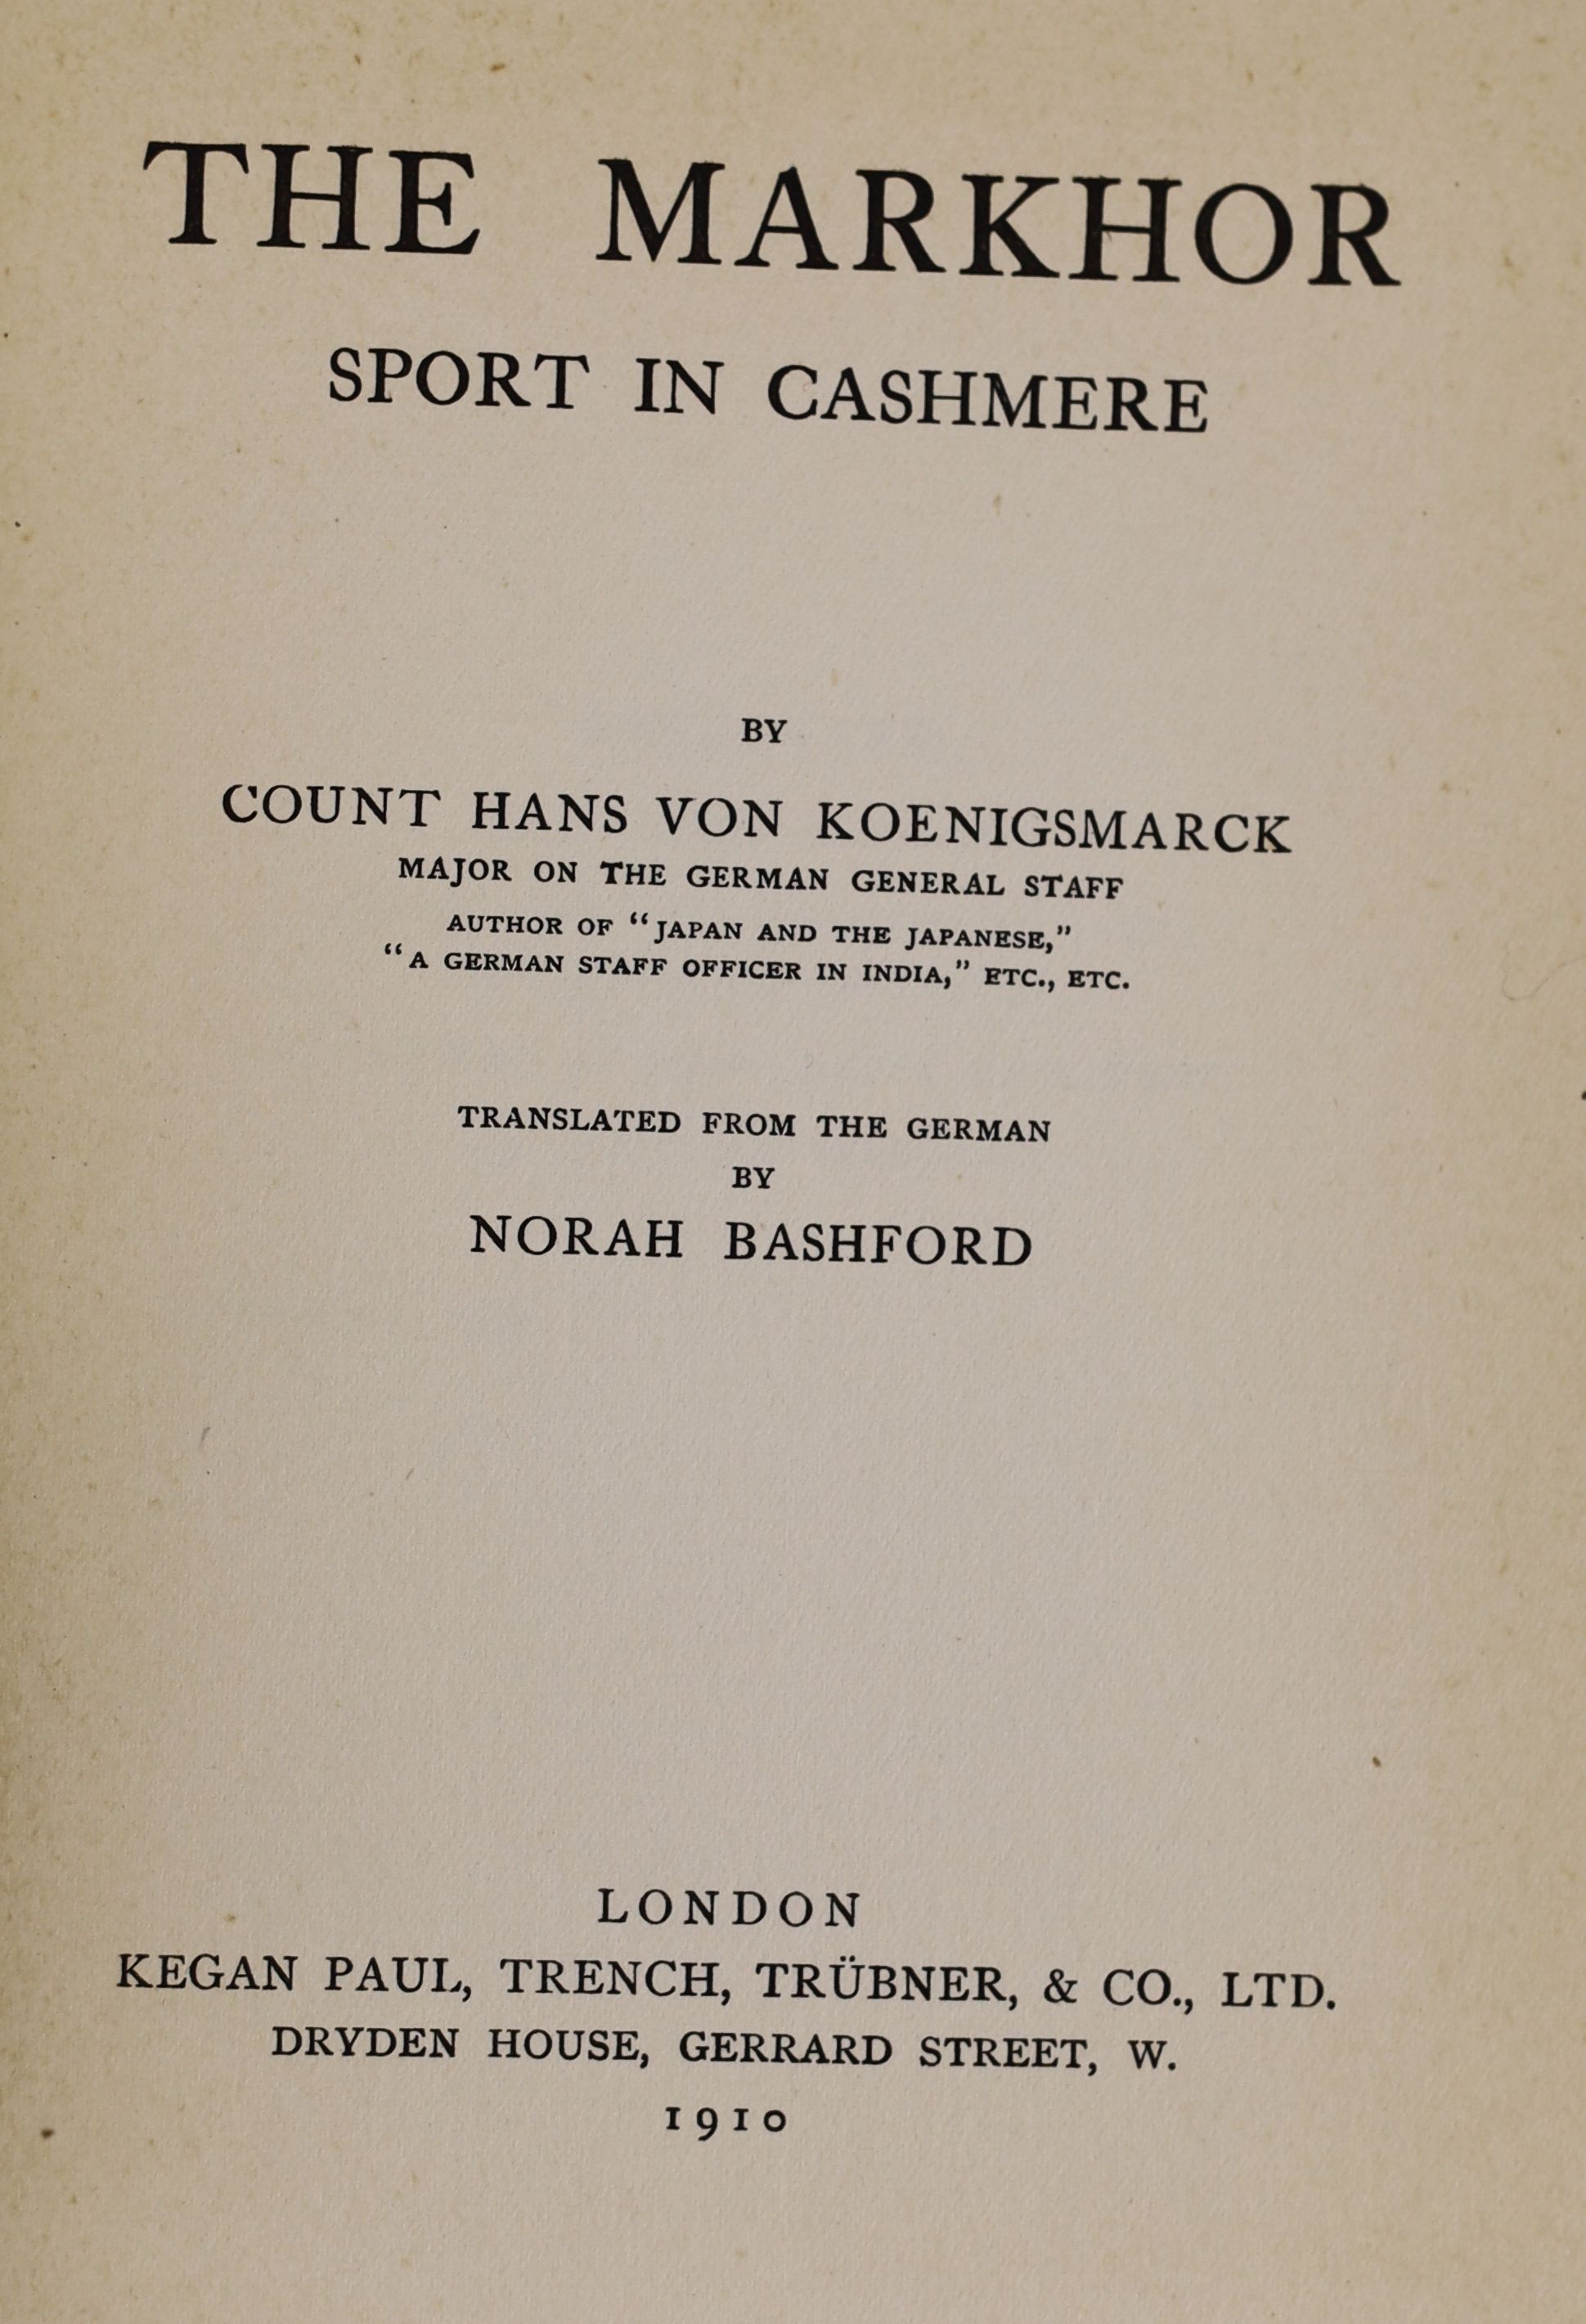 Koenigsmarck, Count Hans von. The Markhor Sport in Cashmere. London, 1910. Original blue pictorial cloth binding, a very good copy. Together with Cobb, E. H. Lieut-Col. The Markhor. 1958. A reprint from Oryx, the Journal